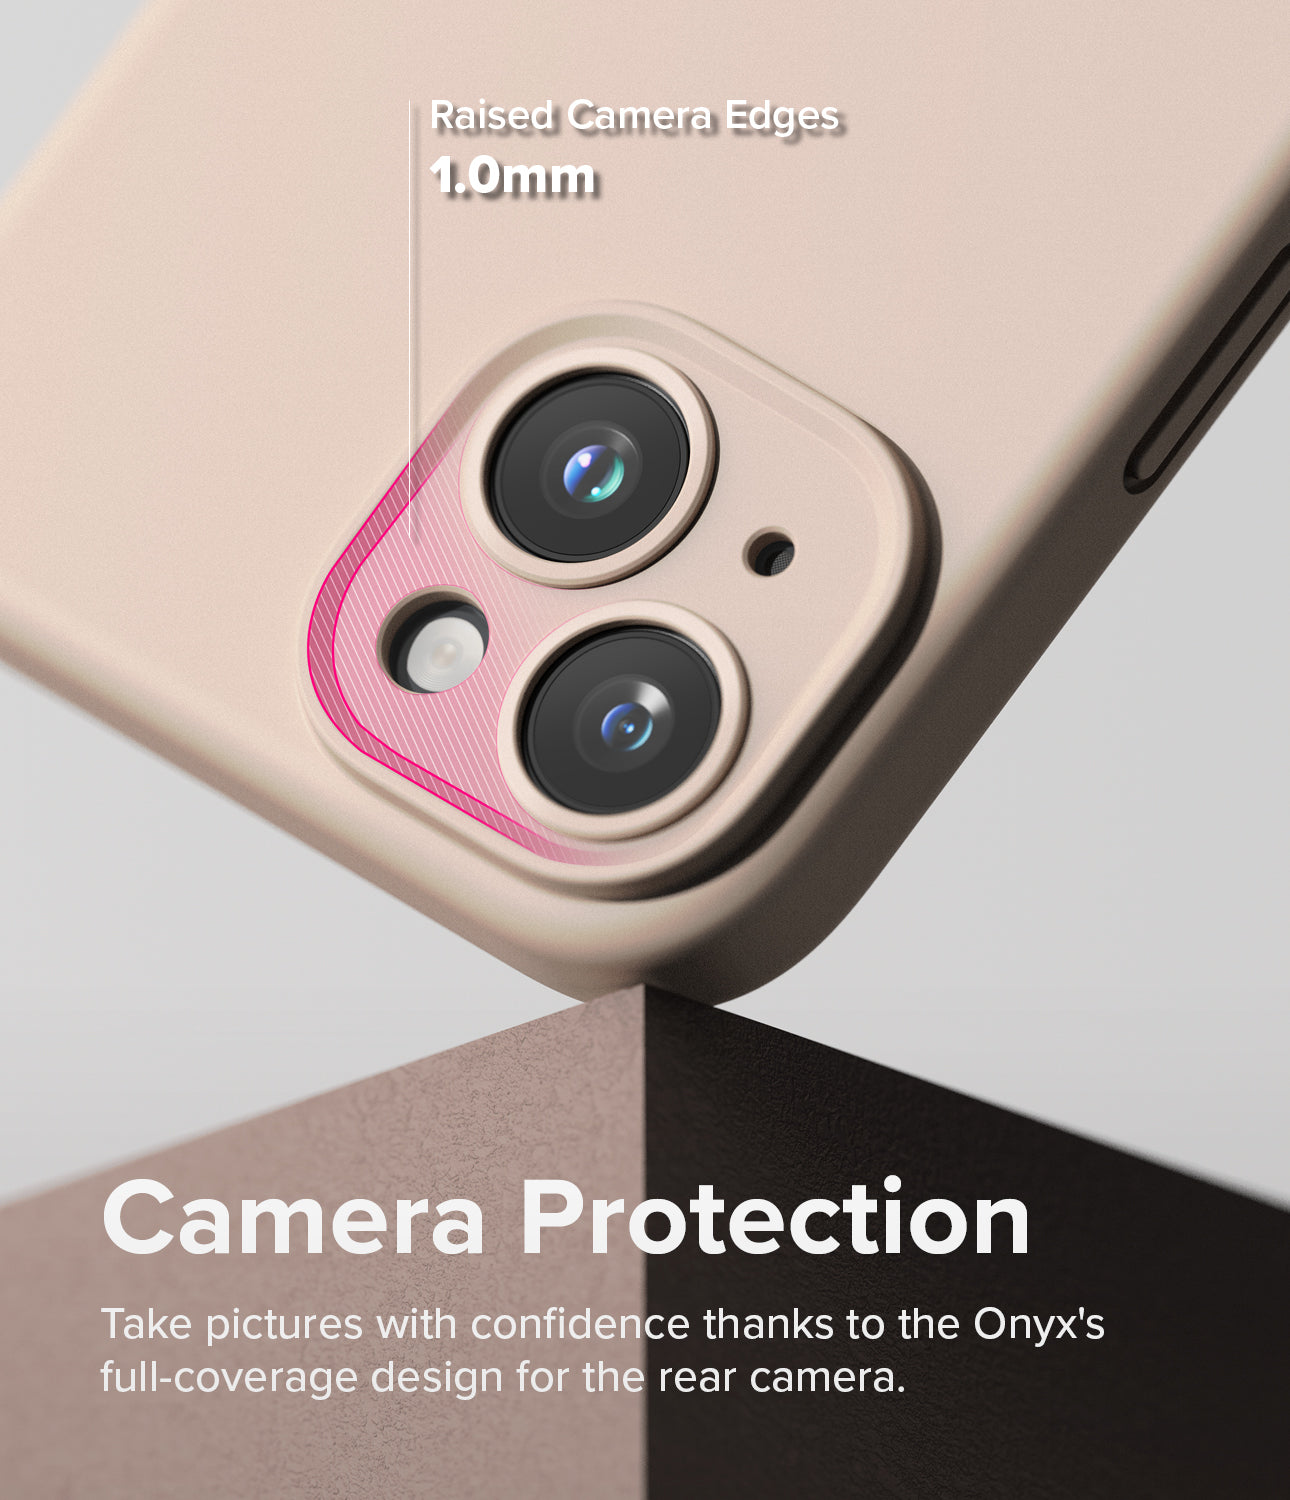 iPhone 15 Plus Case | Silicone Magnetic - 1.0mm raised Camera Edges. Camera Protection. Take pictures with confidence thanks to the Onyx's full-coverage design for the rear camera.